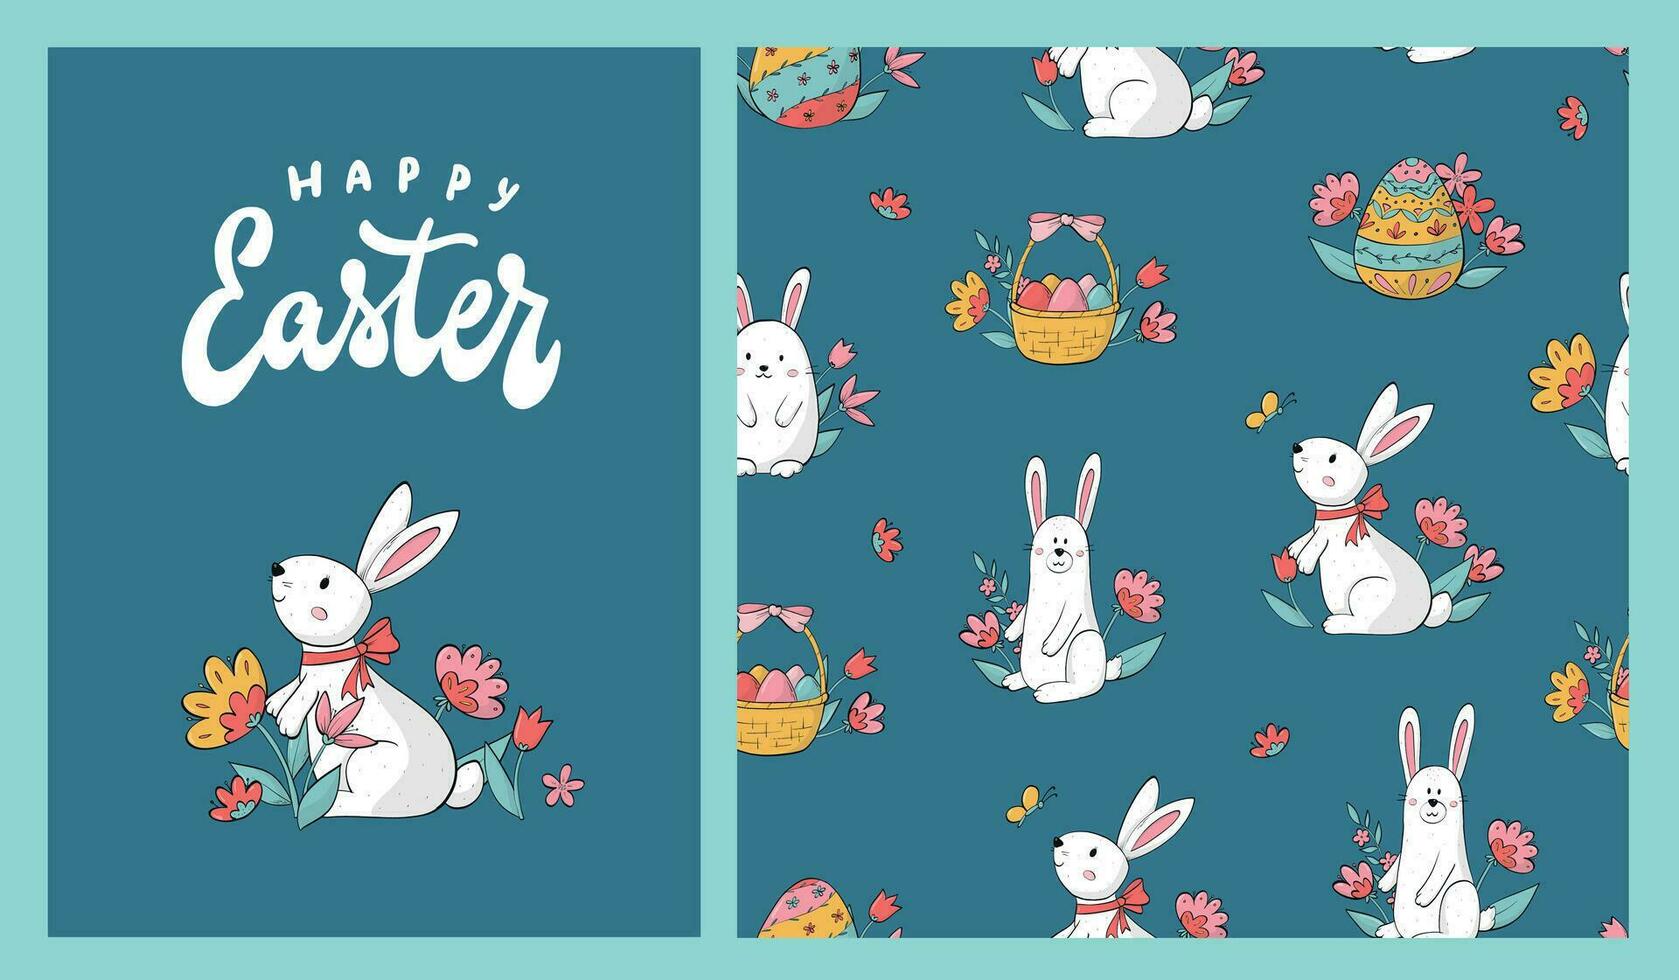 Easter collection of greeting card and seamless pattern with bunnies, flowers and eggs for wallpaper, posters, banners, prints, wrapping paper, etc. EPS 10 vector